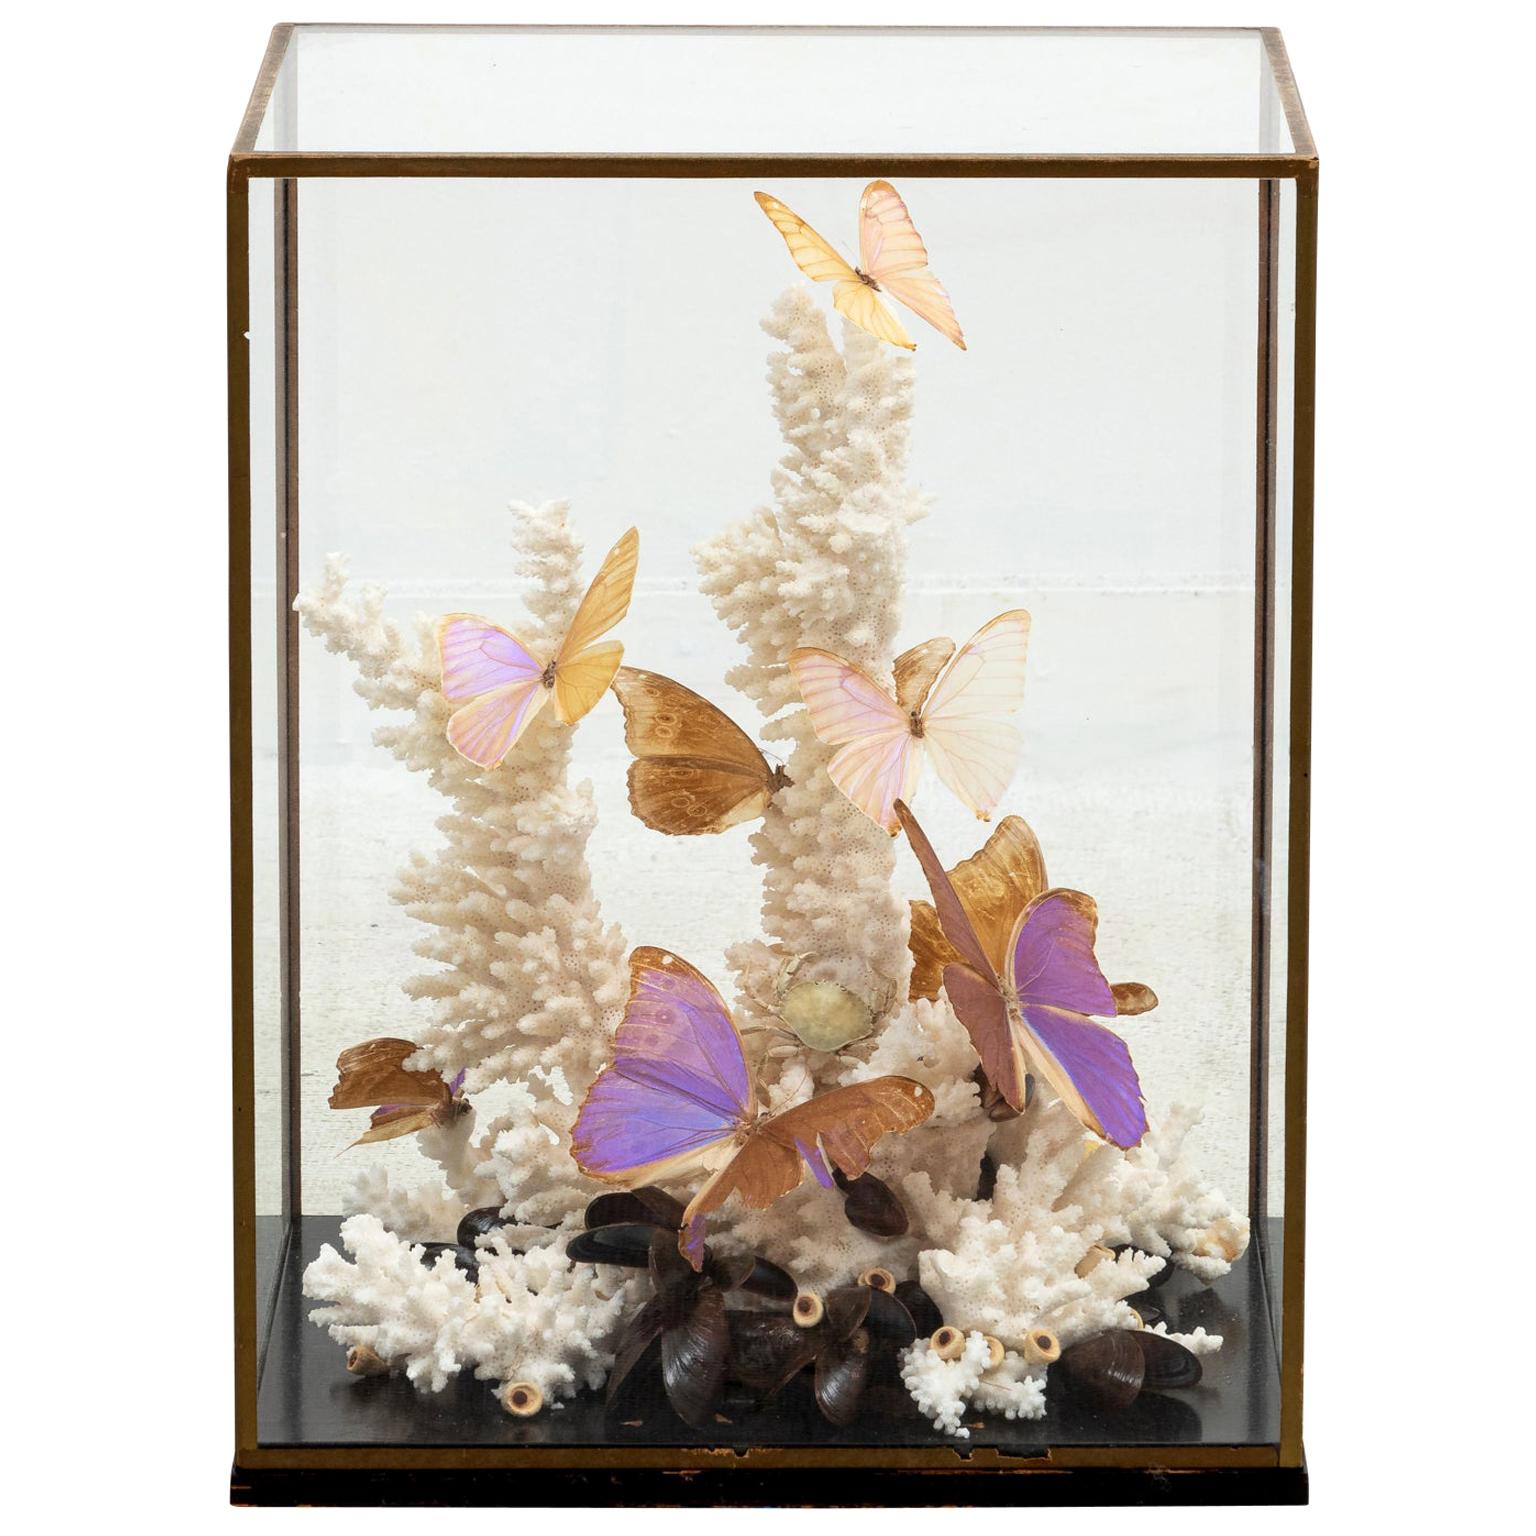 Coral and Butterfly Display Diorama